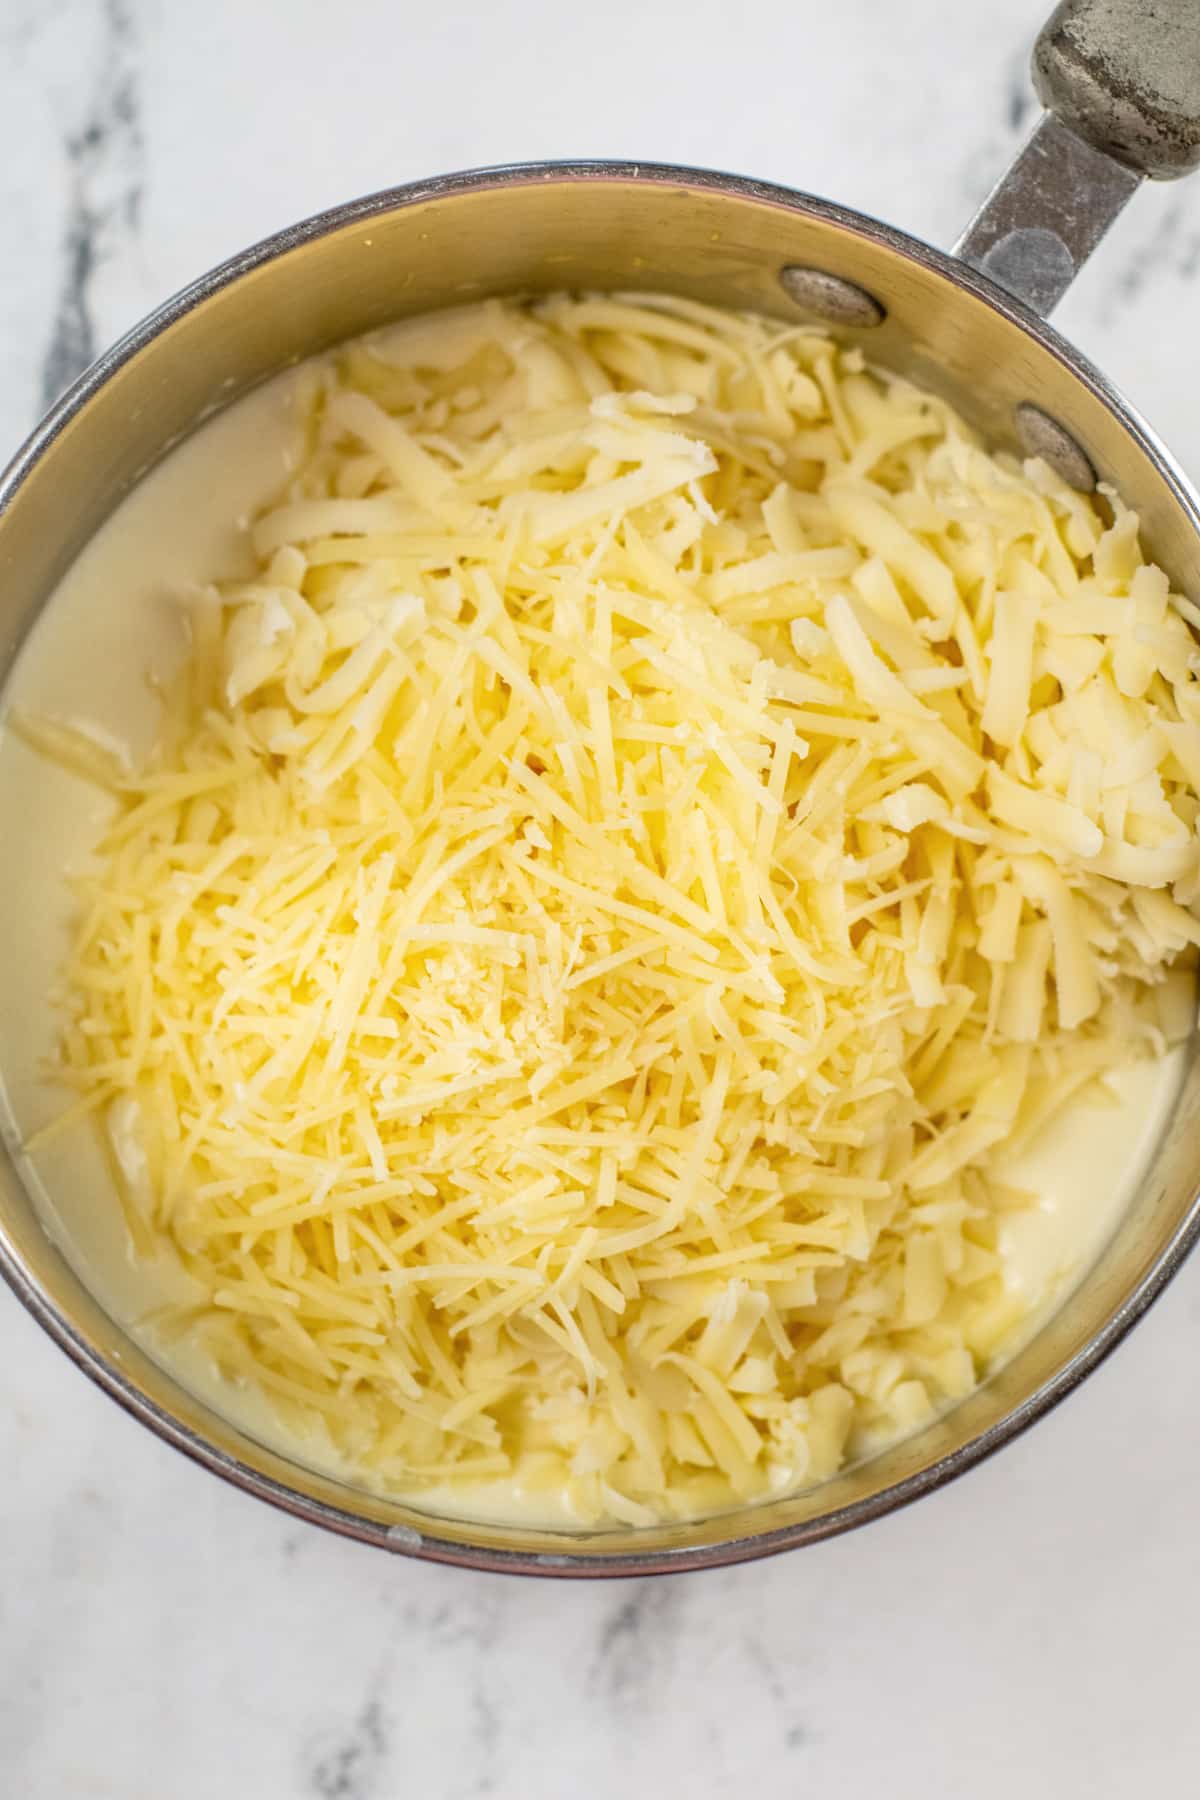 remove from heat and add cheese